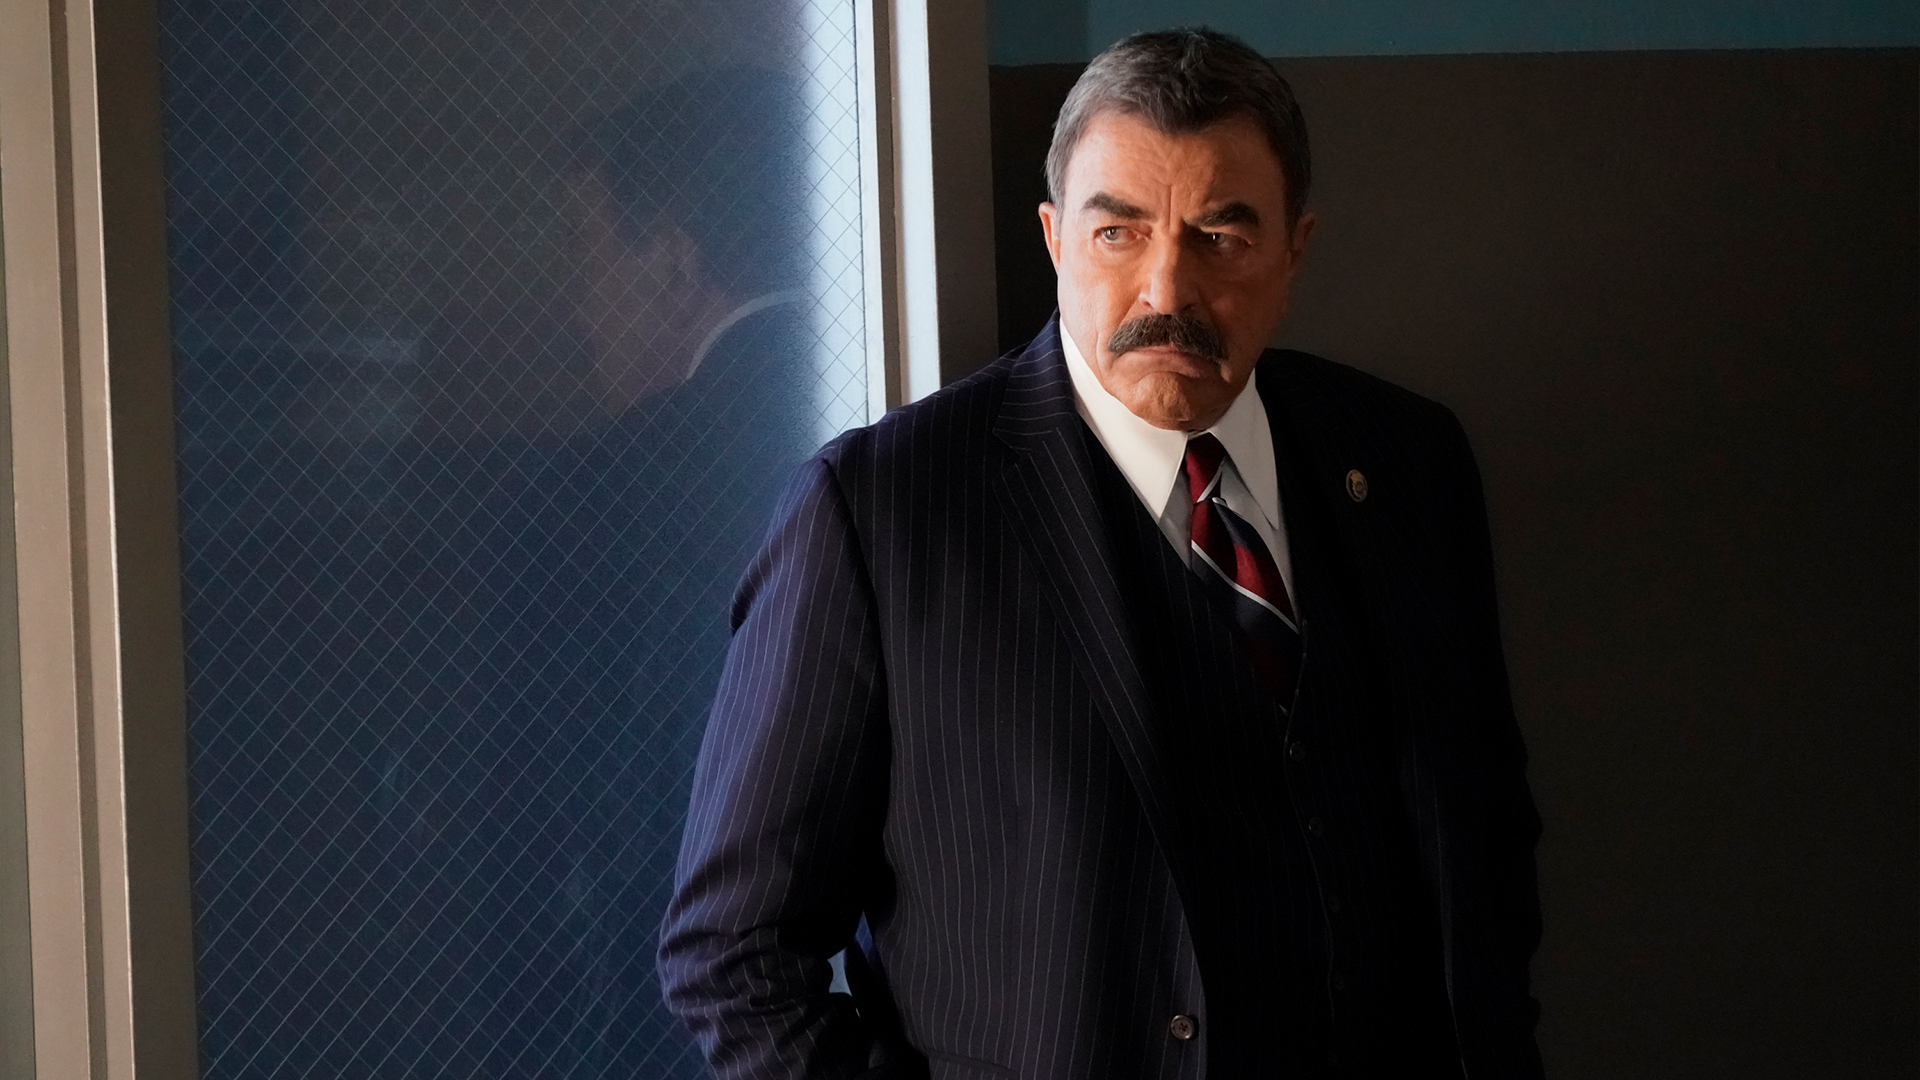 Blue Bloods Season 10 Episode 1 - The Real Deal